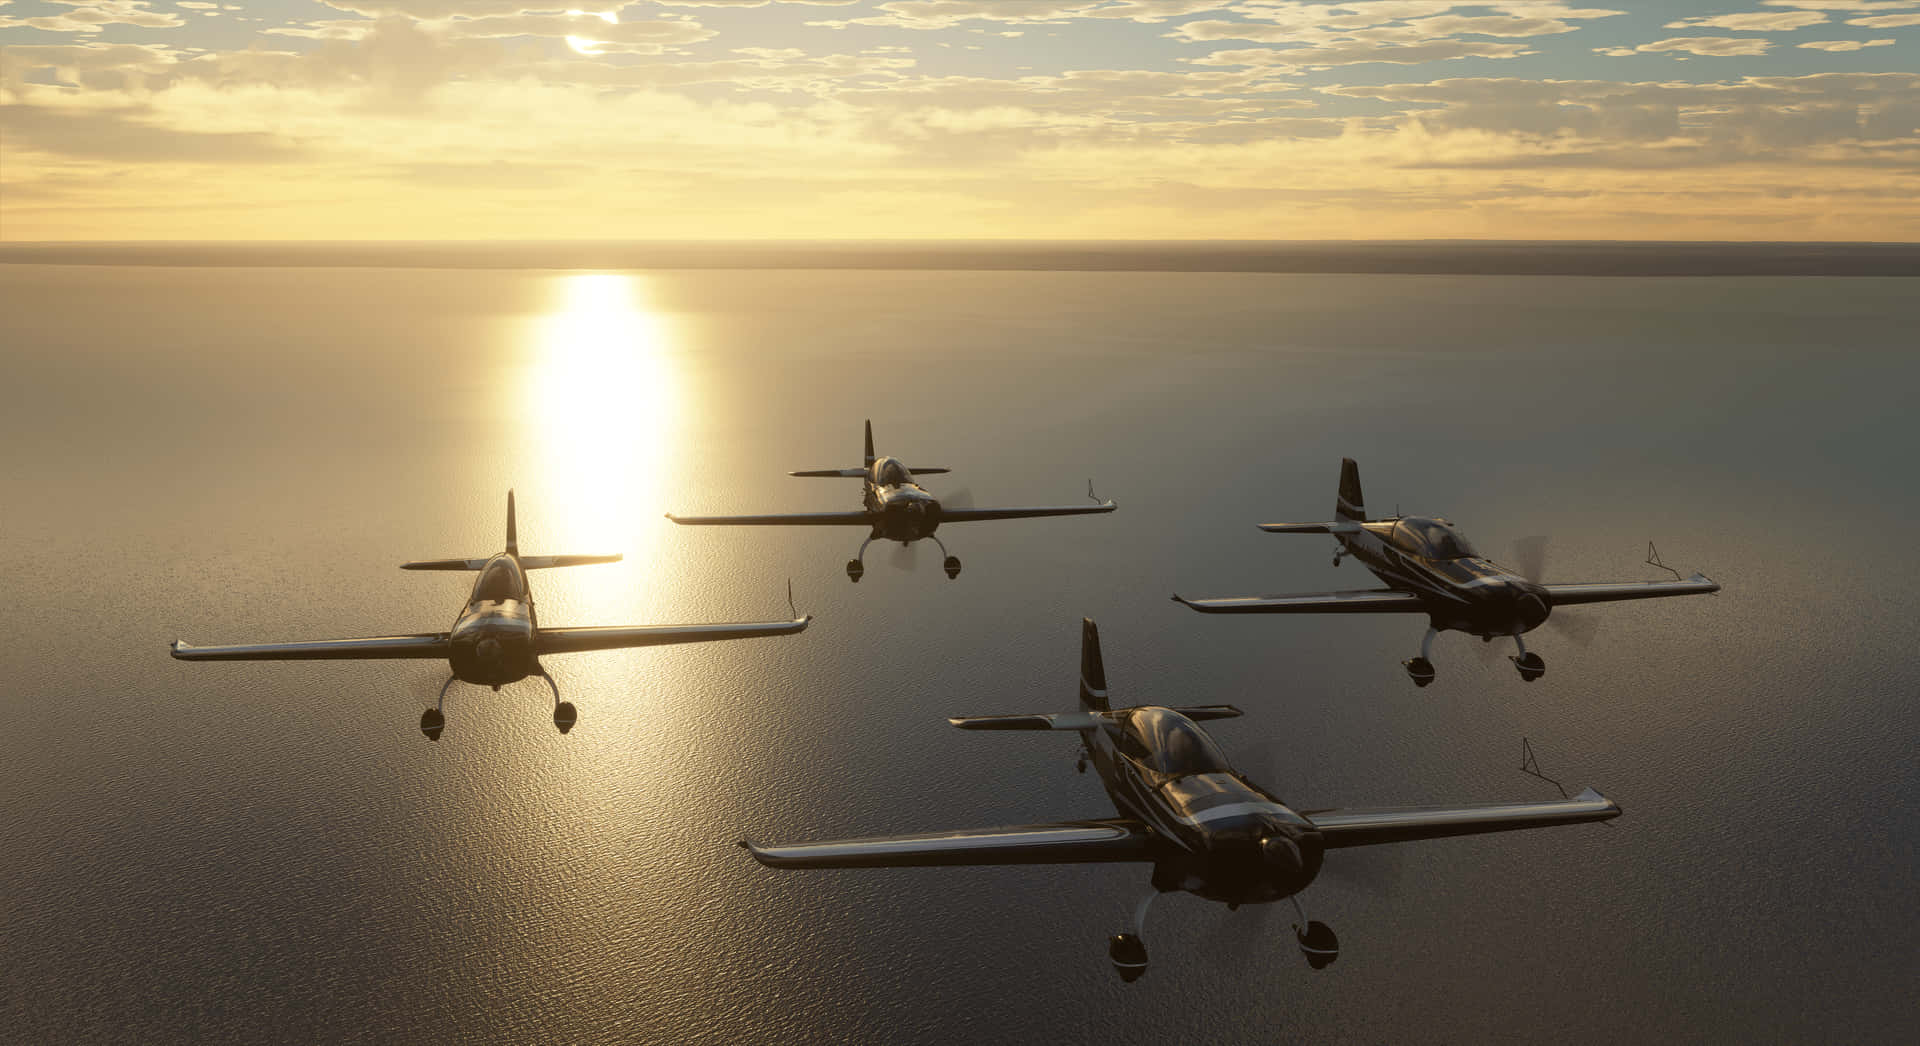 4k Microsoft Flight Simulator Background Four Airplanes Flying Together